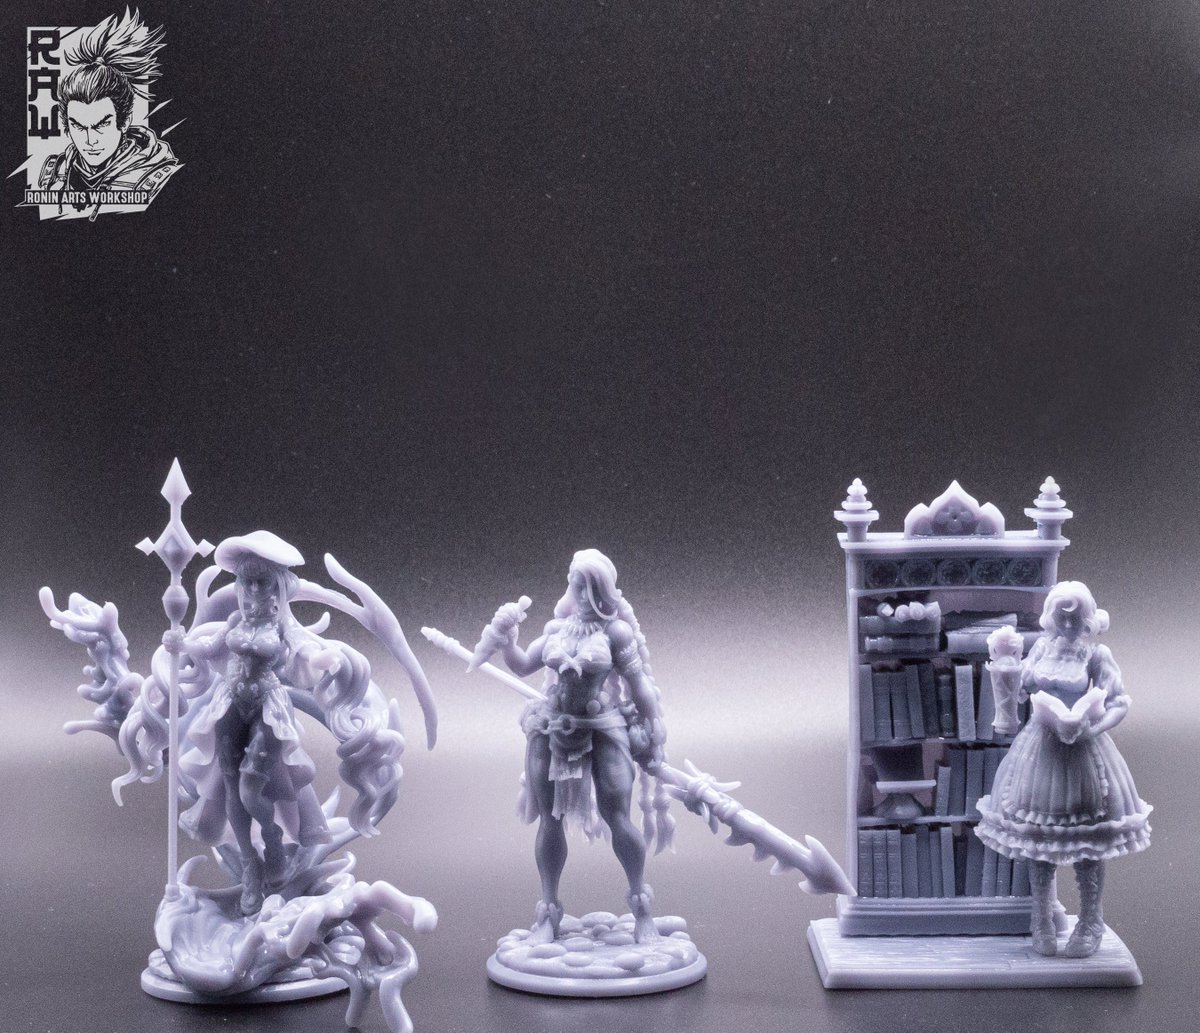 Check out the print photos of our mermaids in their shapeshifted humanoid form!
#3dprinting #warmongers #3dprint #フィギュア #DnD #TRPG #mermay